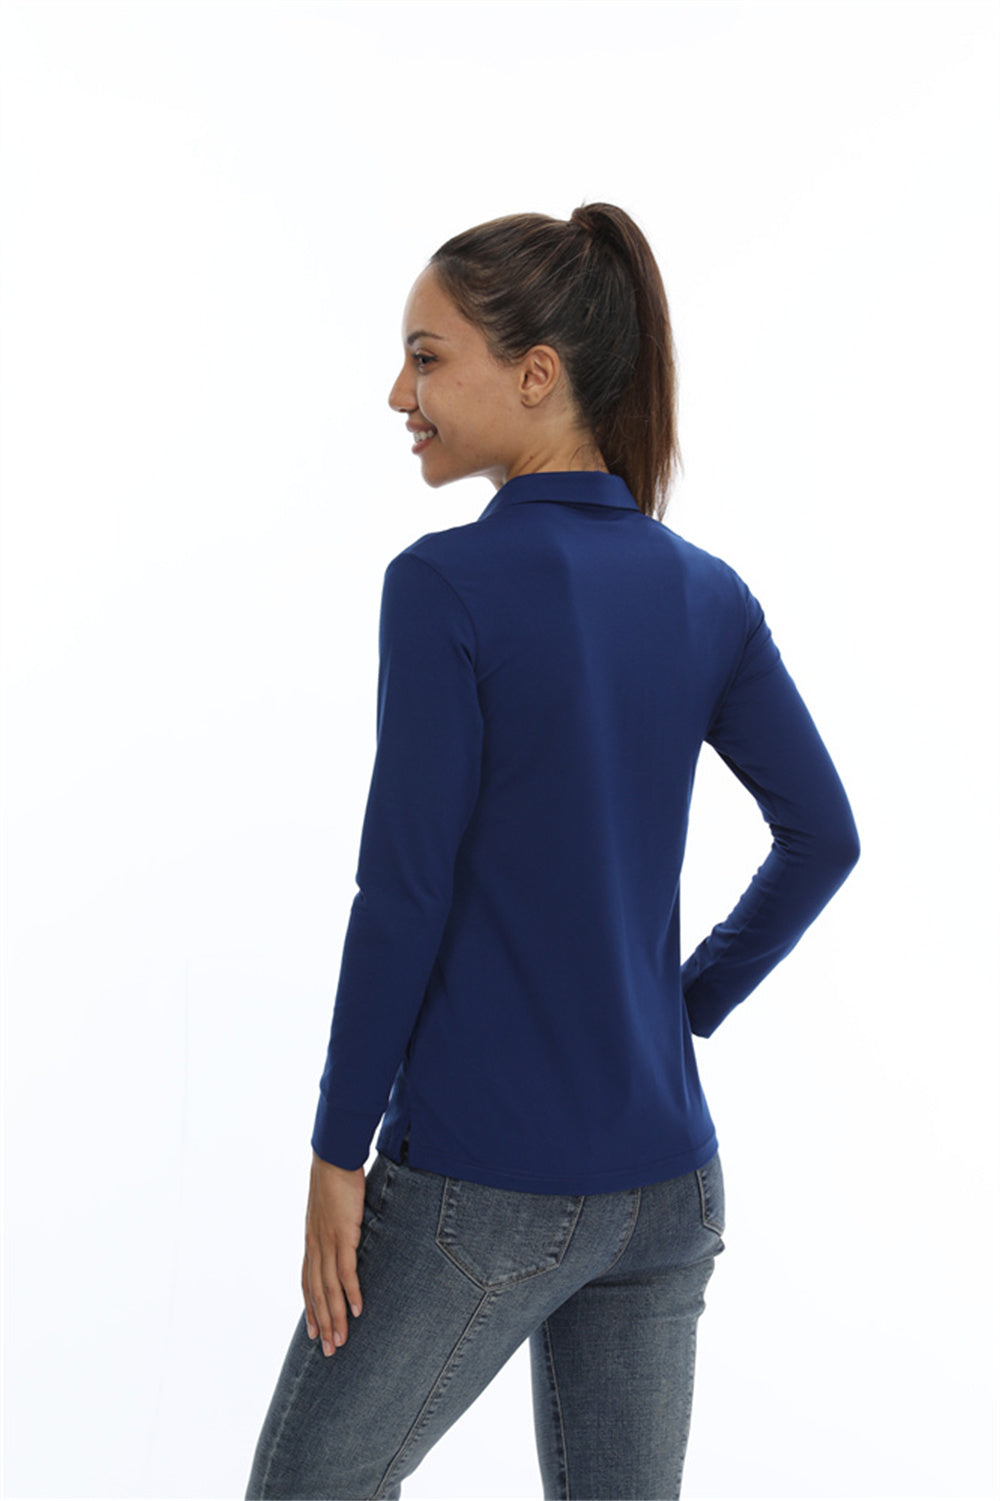 Female wearing a navy long sleeve UPF 50+ sun protection sports polo shirt.